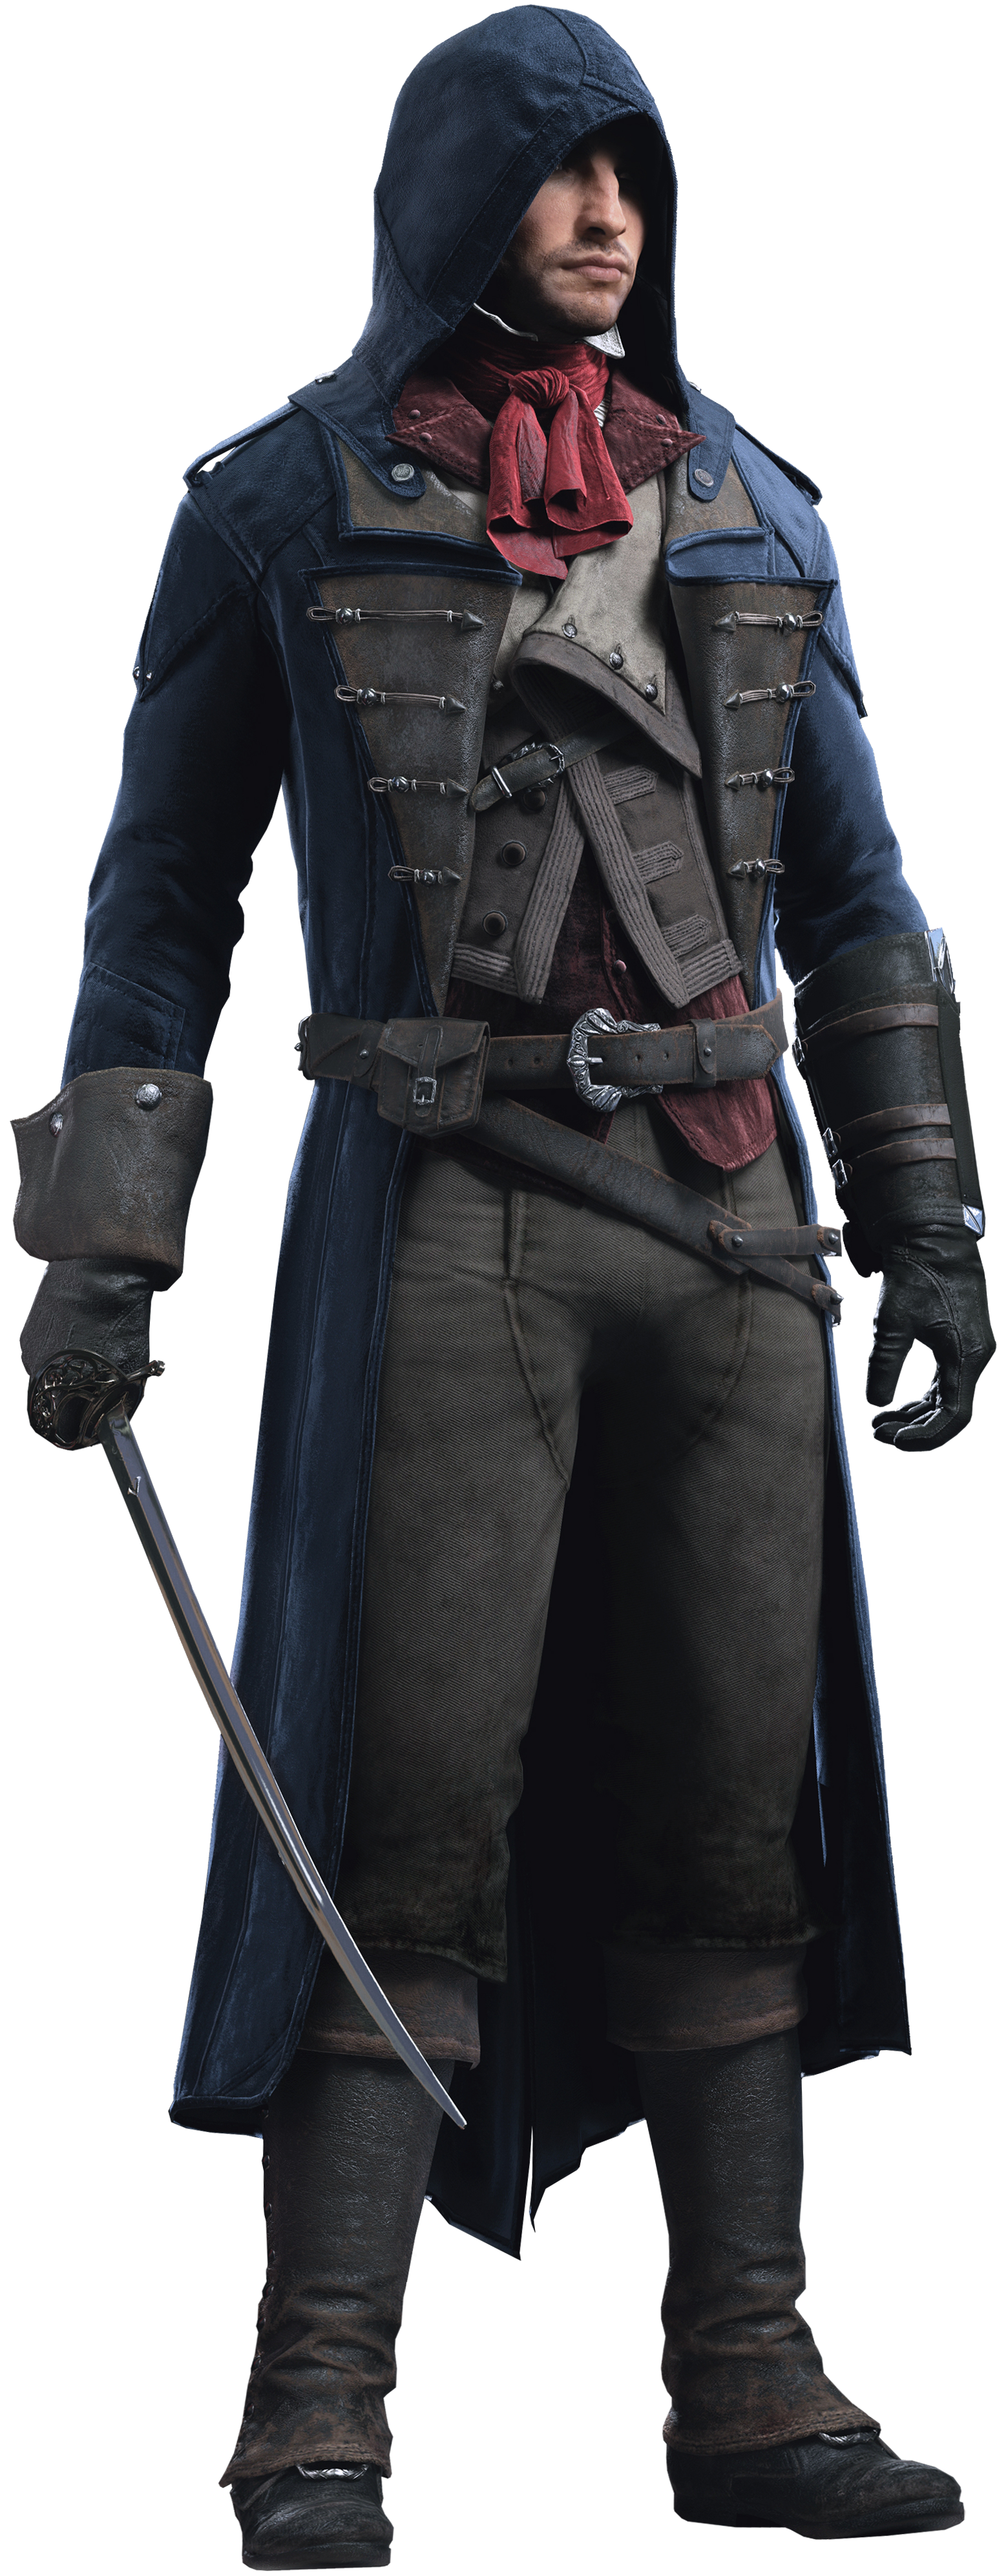 Dead Kings, Assassin's Creed Wiki